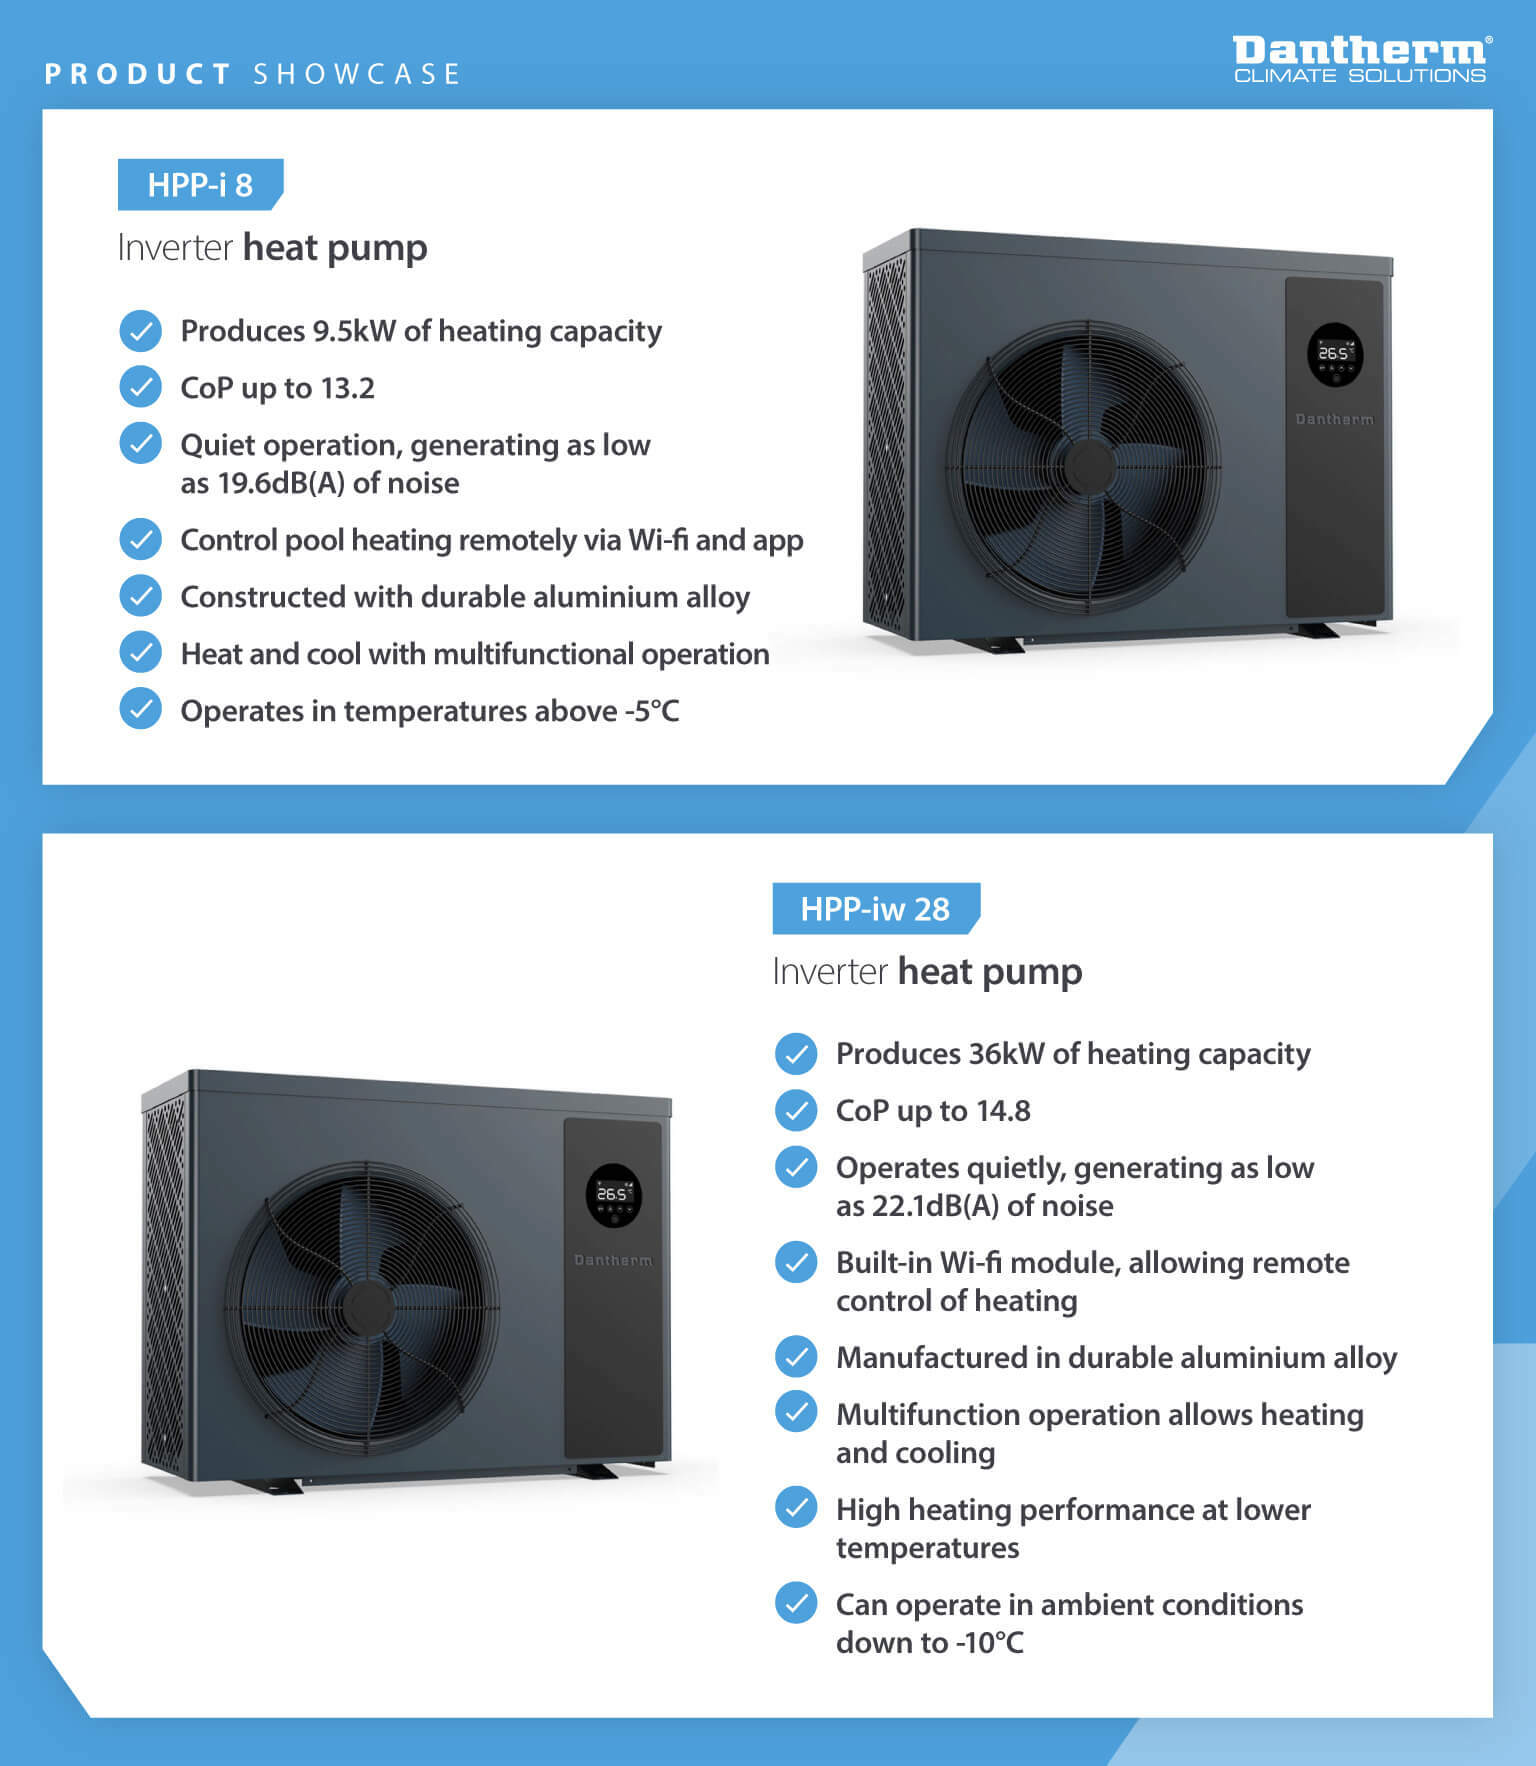 Product showcase comparing 2 Dantherm inverter swimming pool heat pump models with features information.